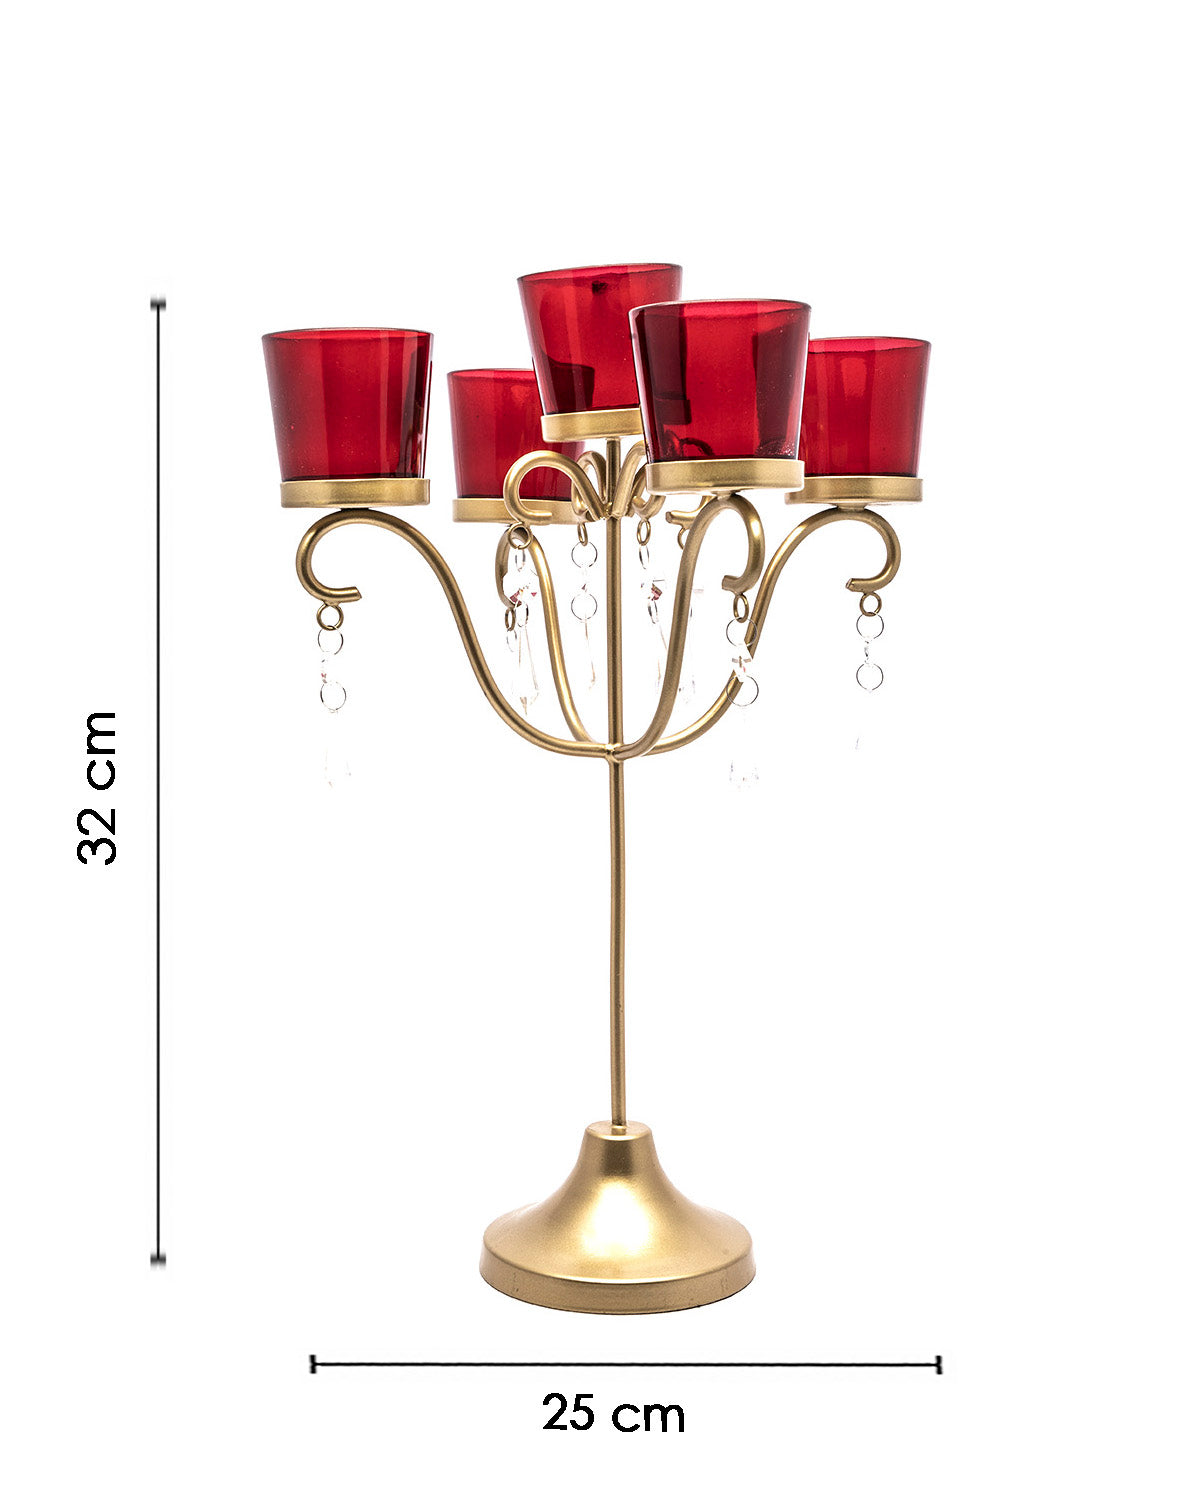 VON CASA 5 Arms T-Light Candle Holder, Red Votive, Clear Crystal, Gold Finish, Mild Steel